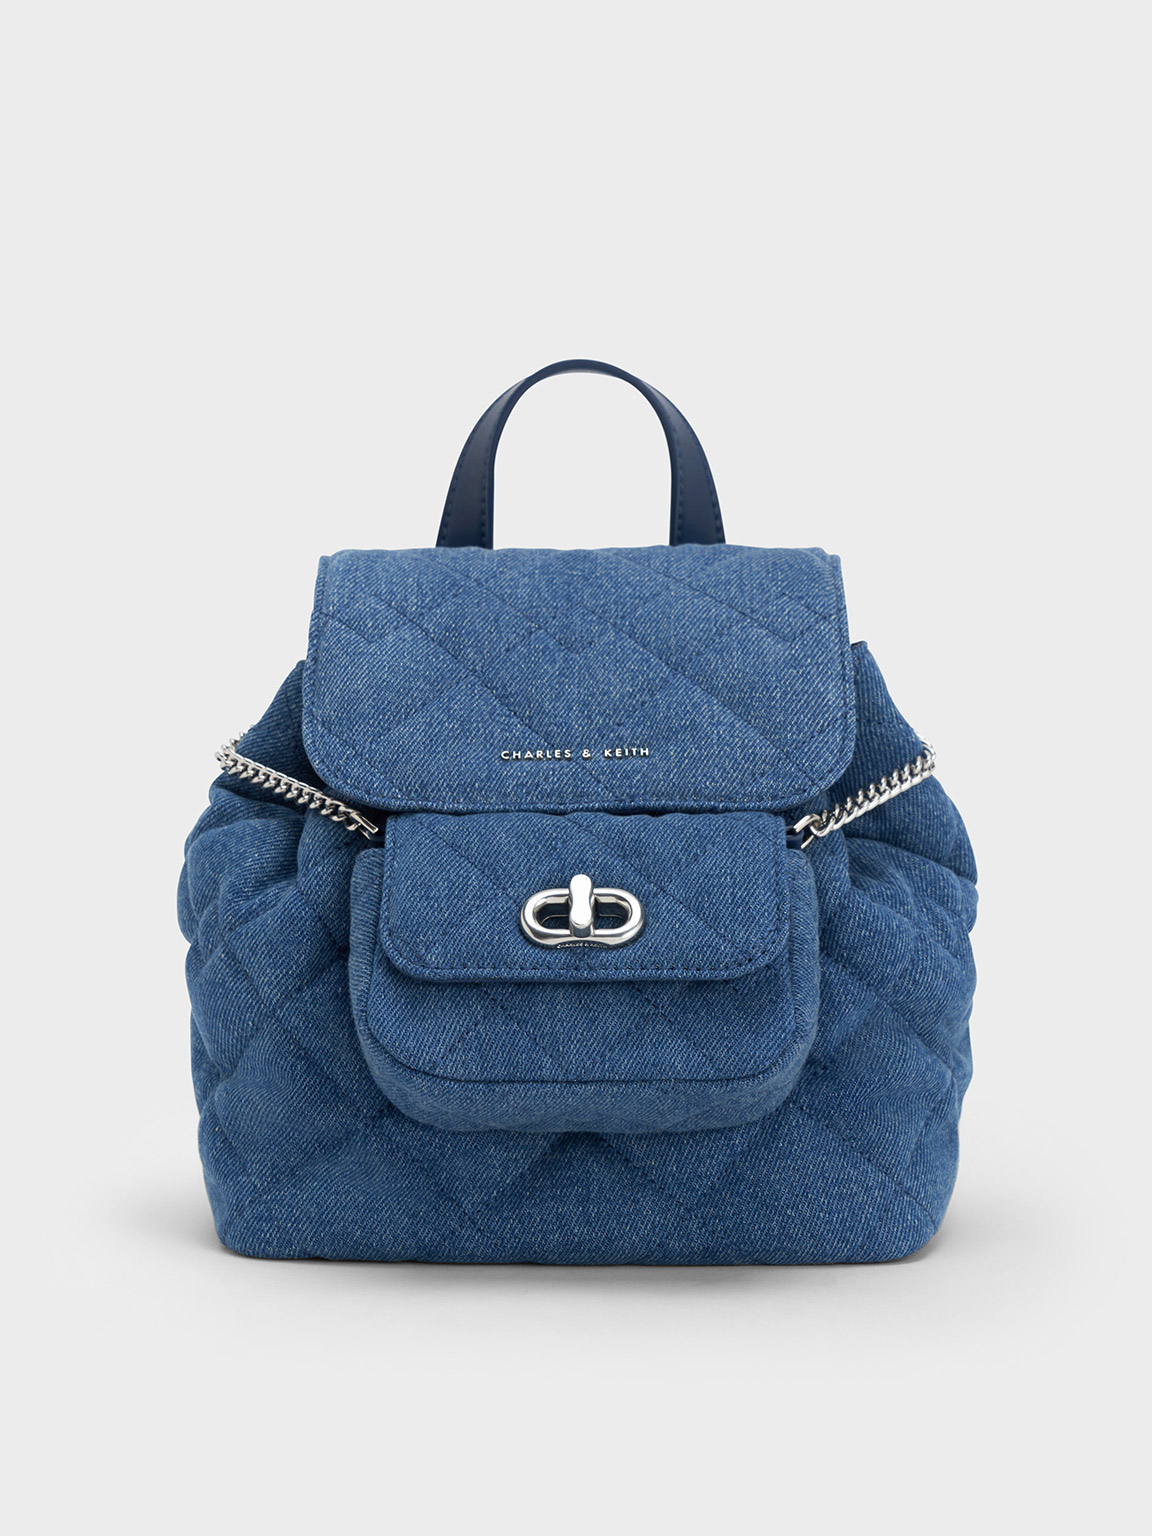 Charles & Keith Aubrielle Denim Quilted Backpack In Denim Blue